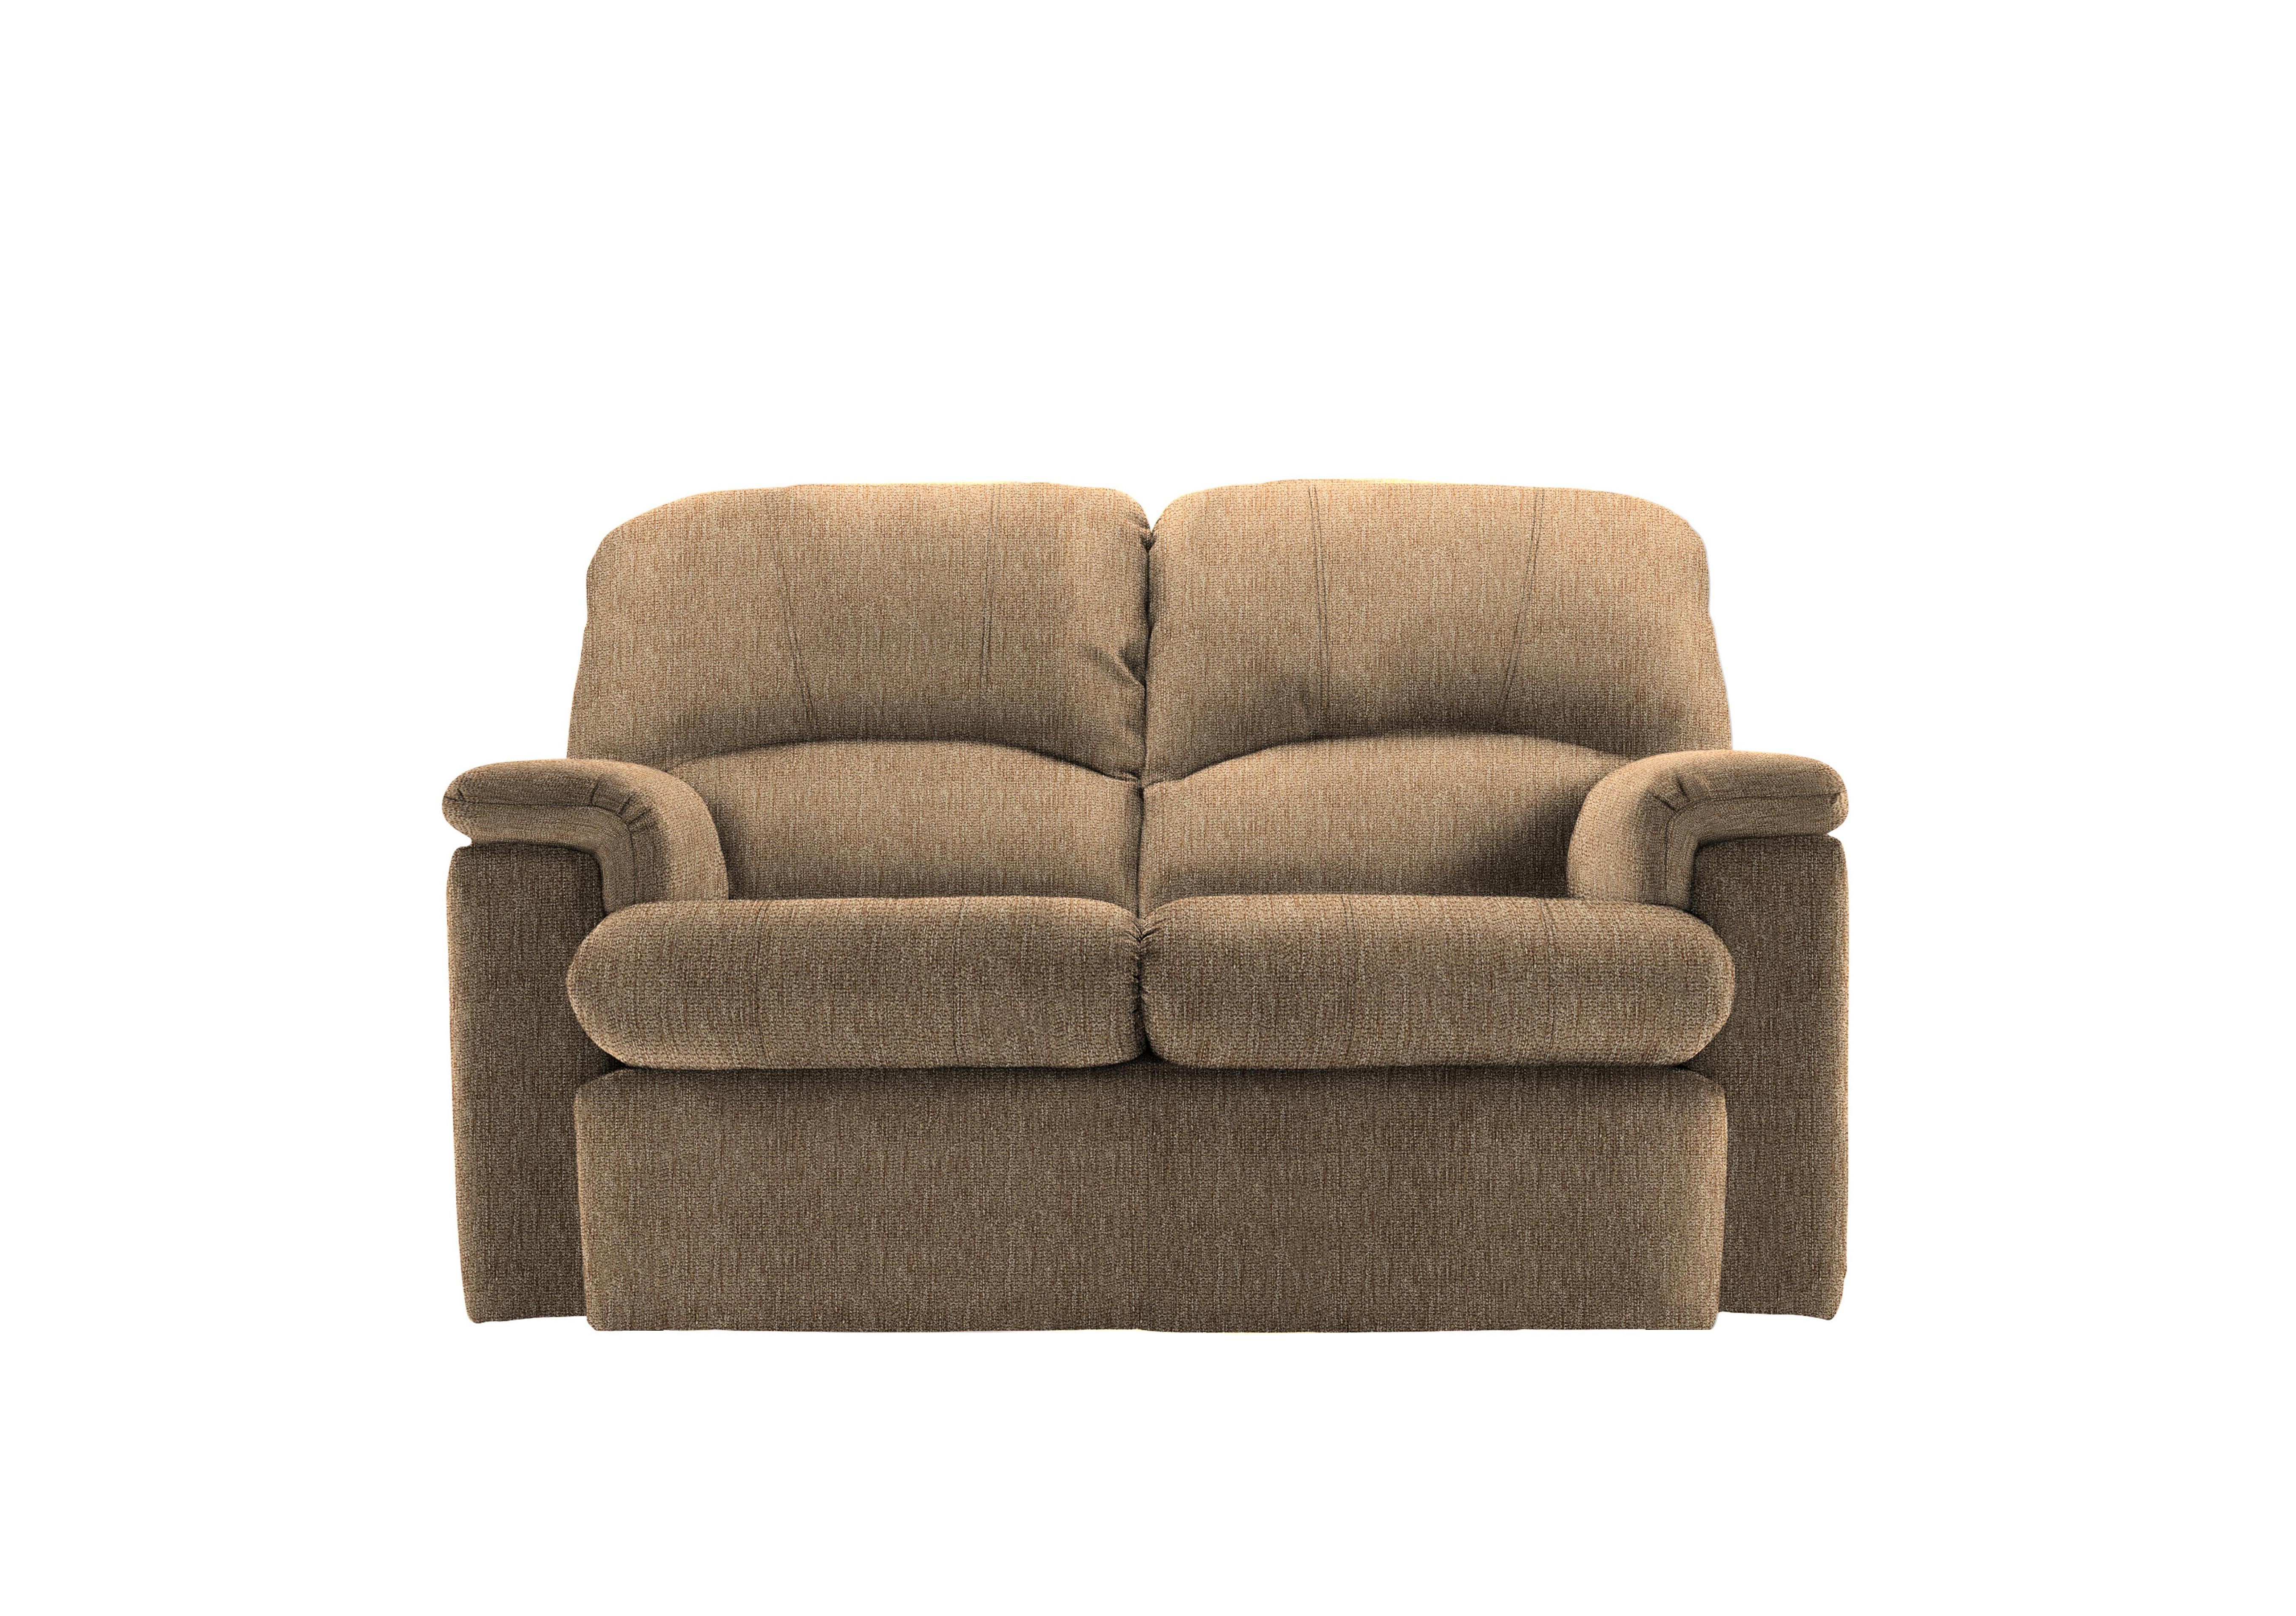 Chloe 2 Seater Fabric Sofa in A070 Boucle Cocoa on Furniture Village